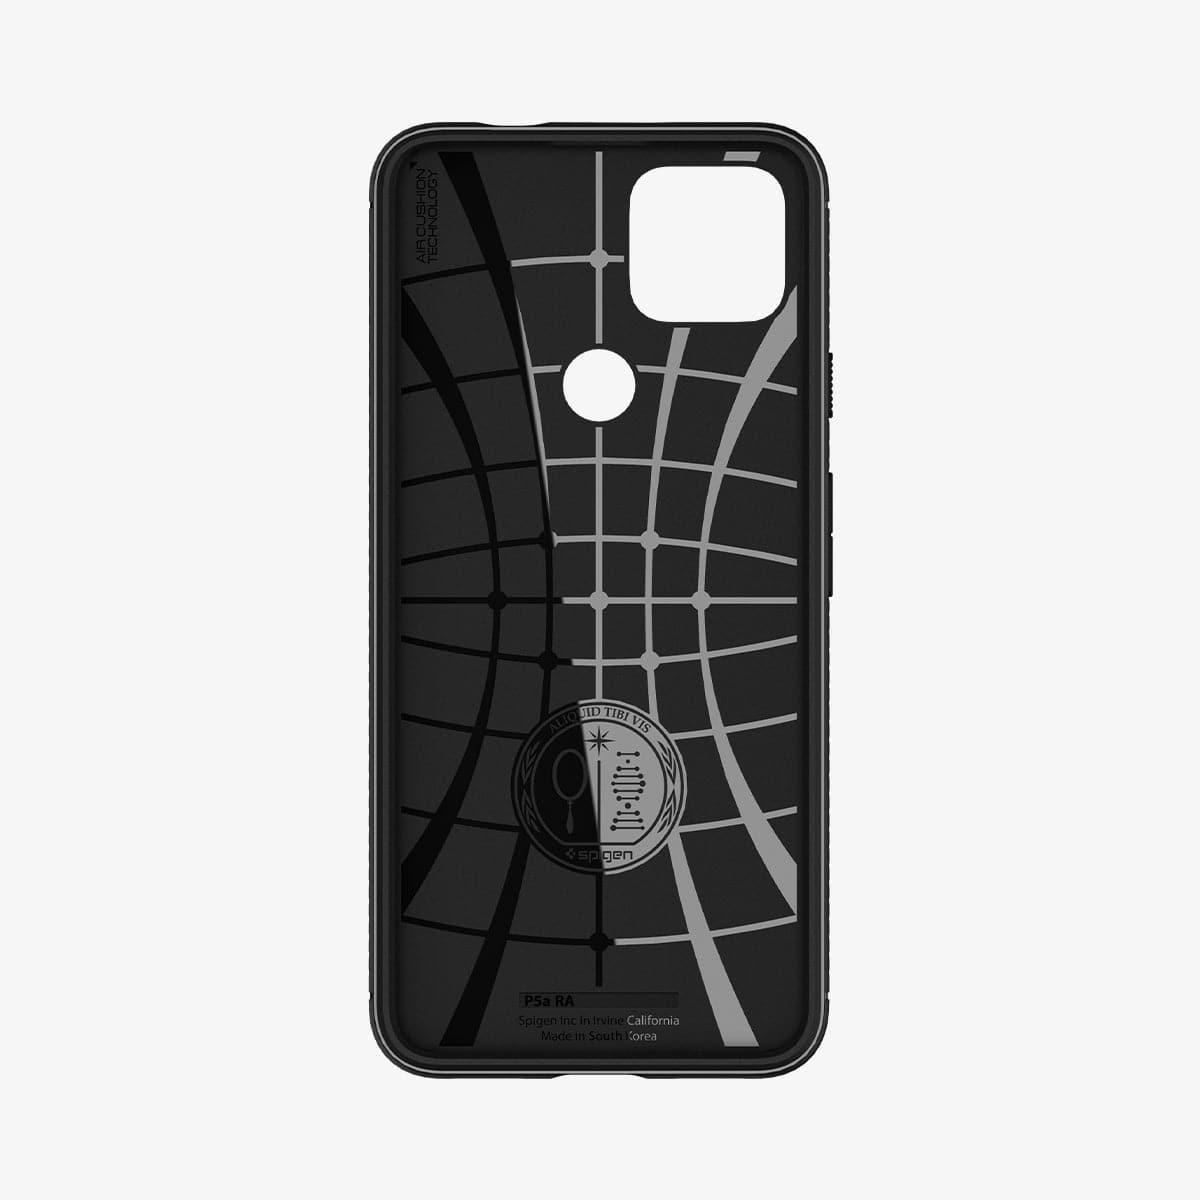 ACS02908 - Pixel 5a Case Rugged Armor in matte black showing the inside of case